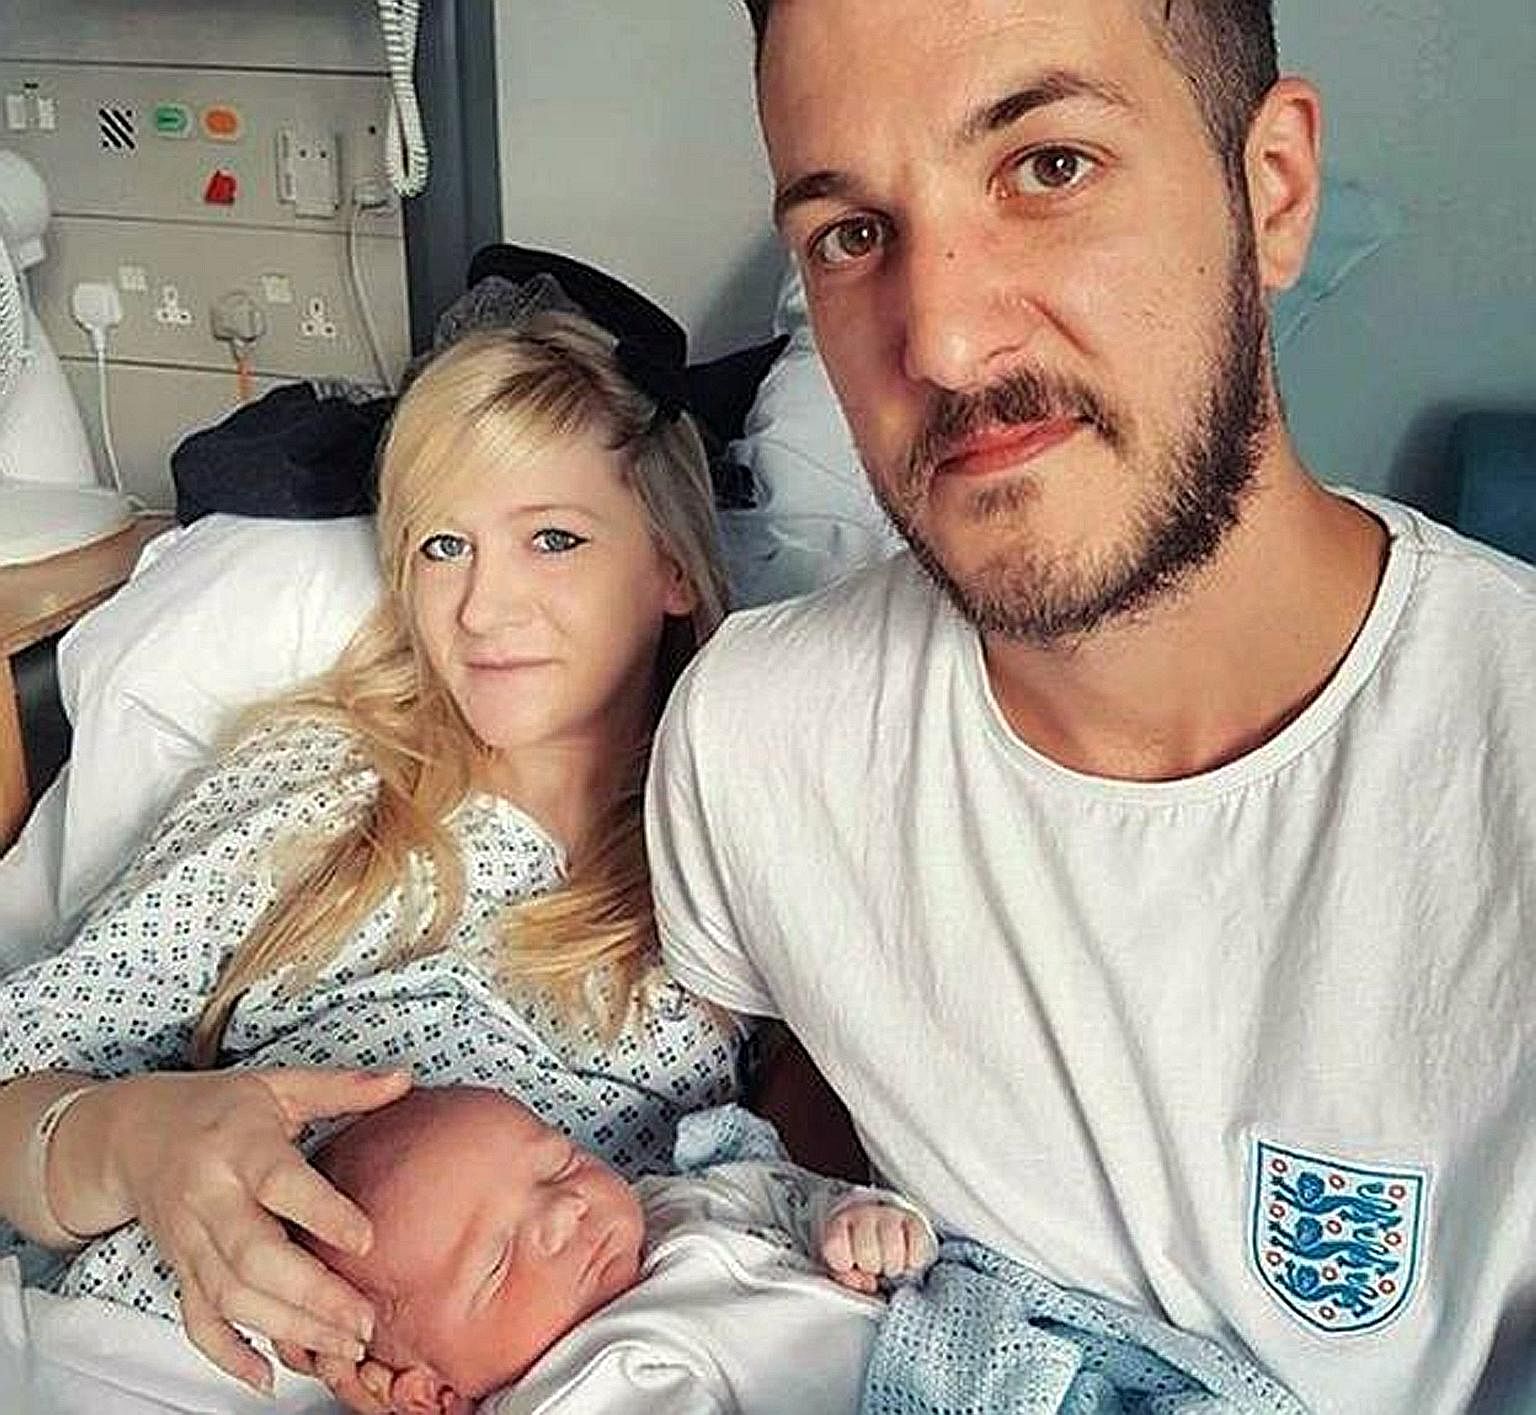 Ten-month-old Charlie Gard, who suffers from a rare genetic condition, with his parents, Ms Connie Yates and Mr Chris Gard. British courts have ruled that Charlie should be taken off life support as further treatment would prolong his suffering.